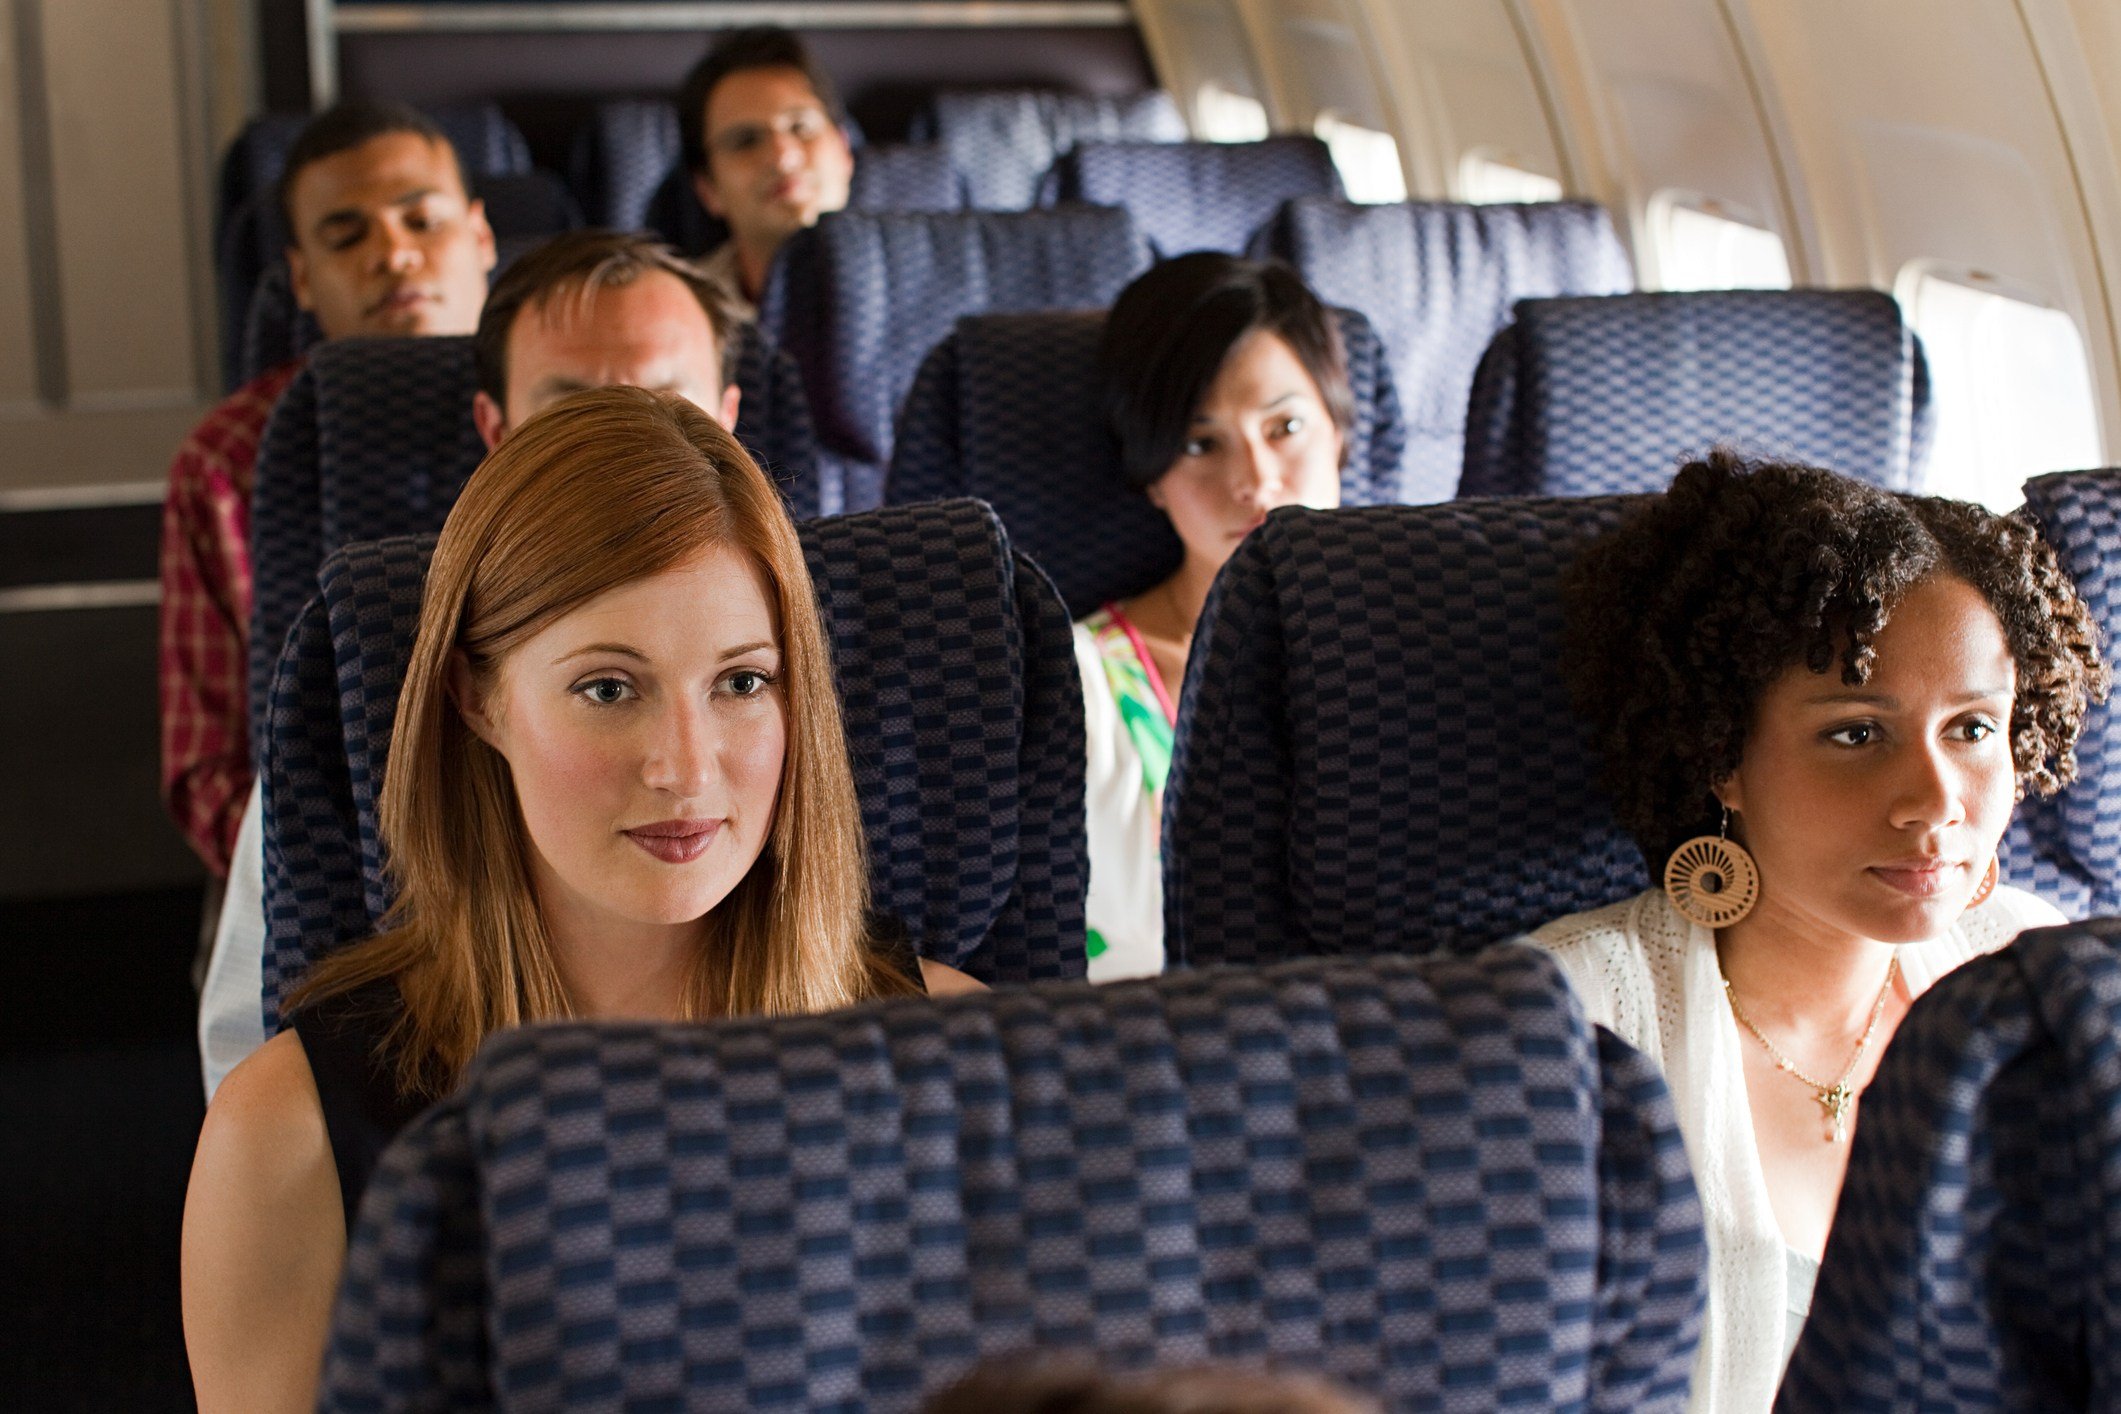 passengers sitting on an airplane